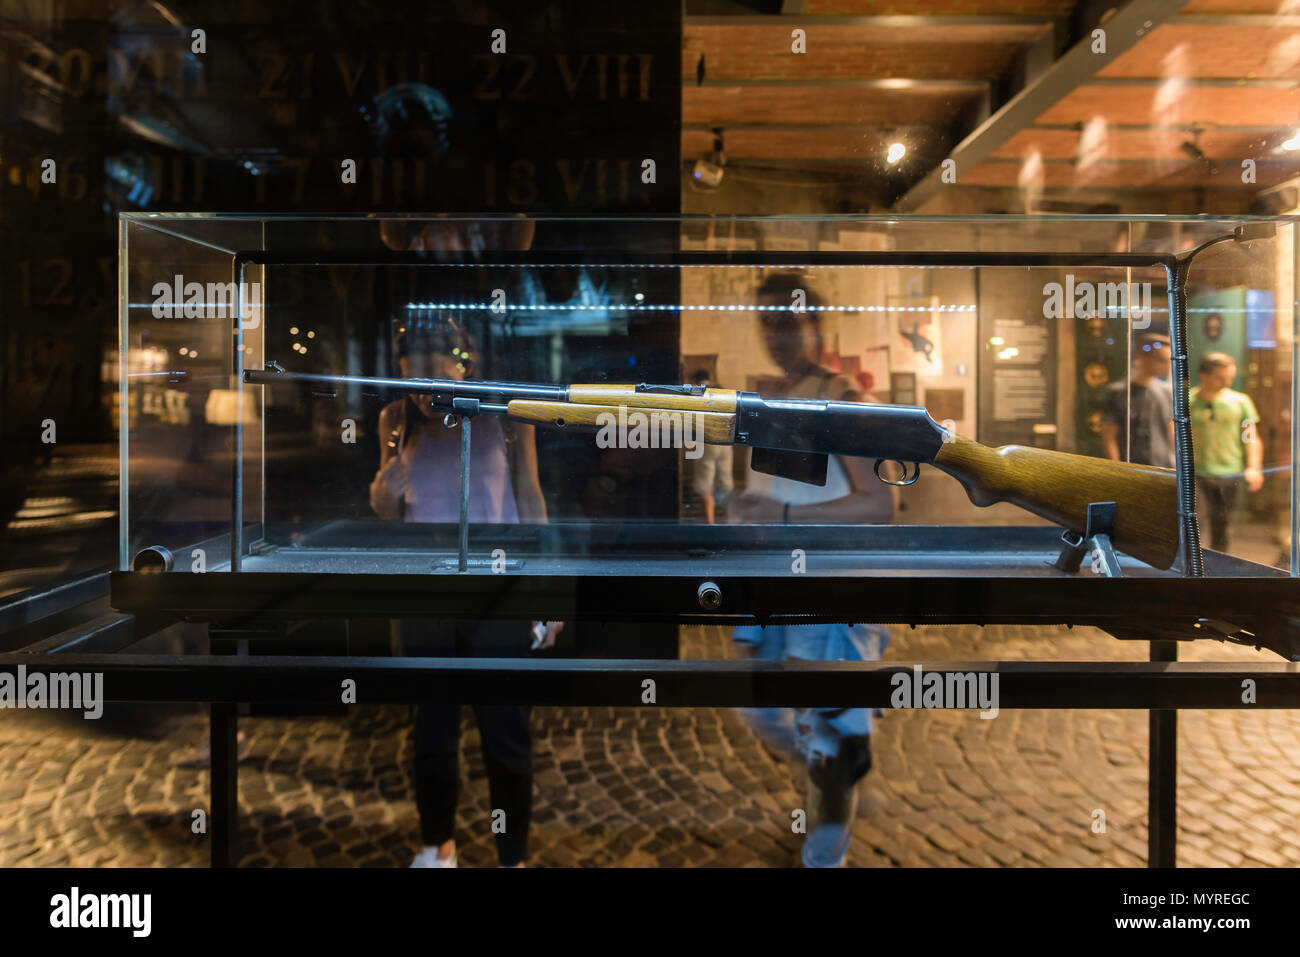 Warsaw Rising Museum, a rare Polish Maroszek 7.92mm rifle in a display case in the Warsaw Uprising Museum, Poland. Stock Photo